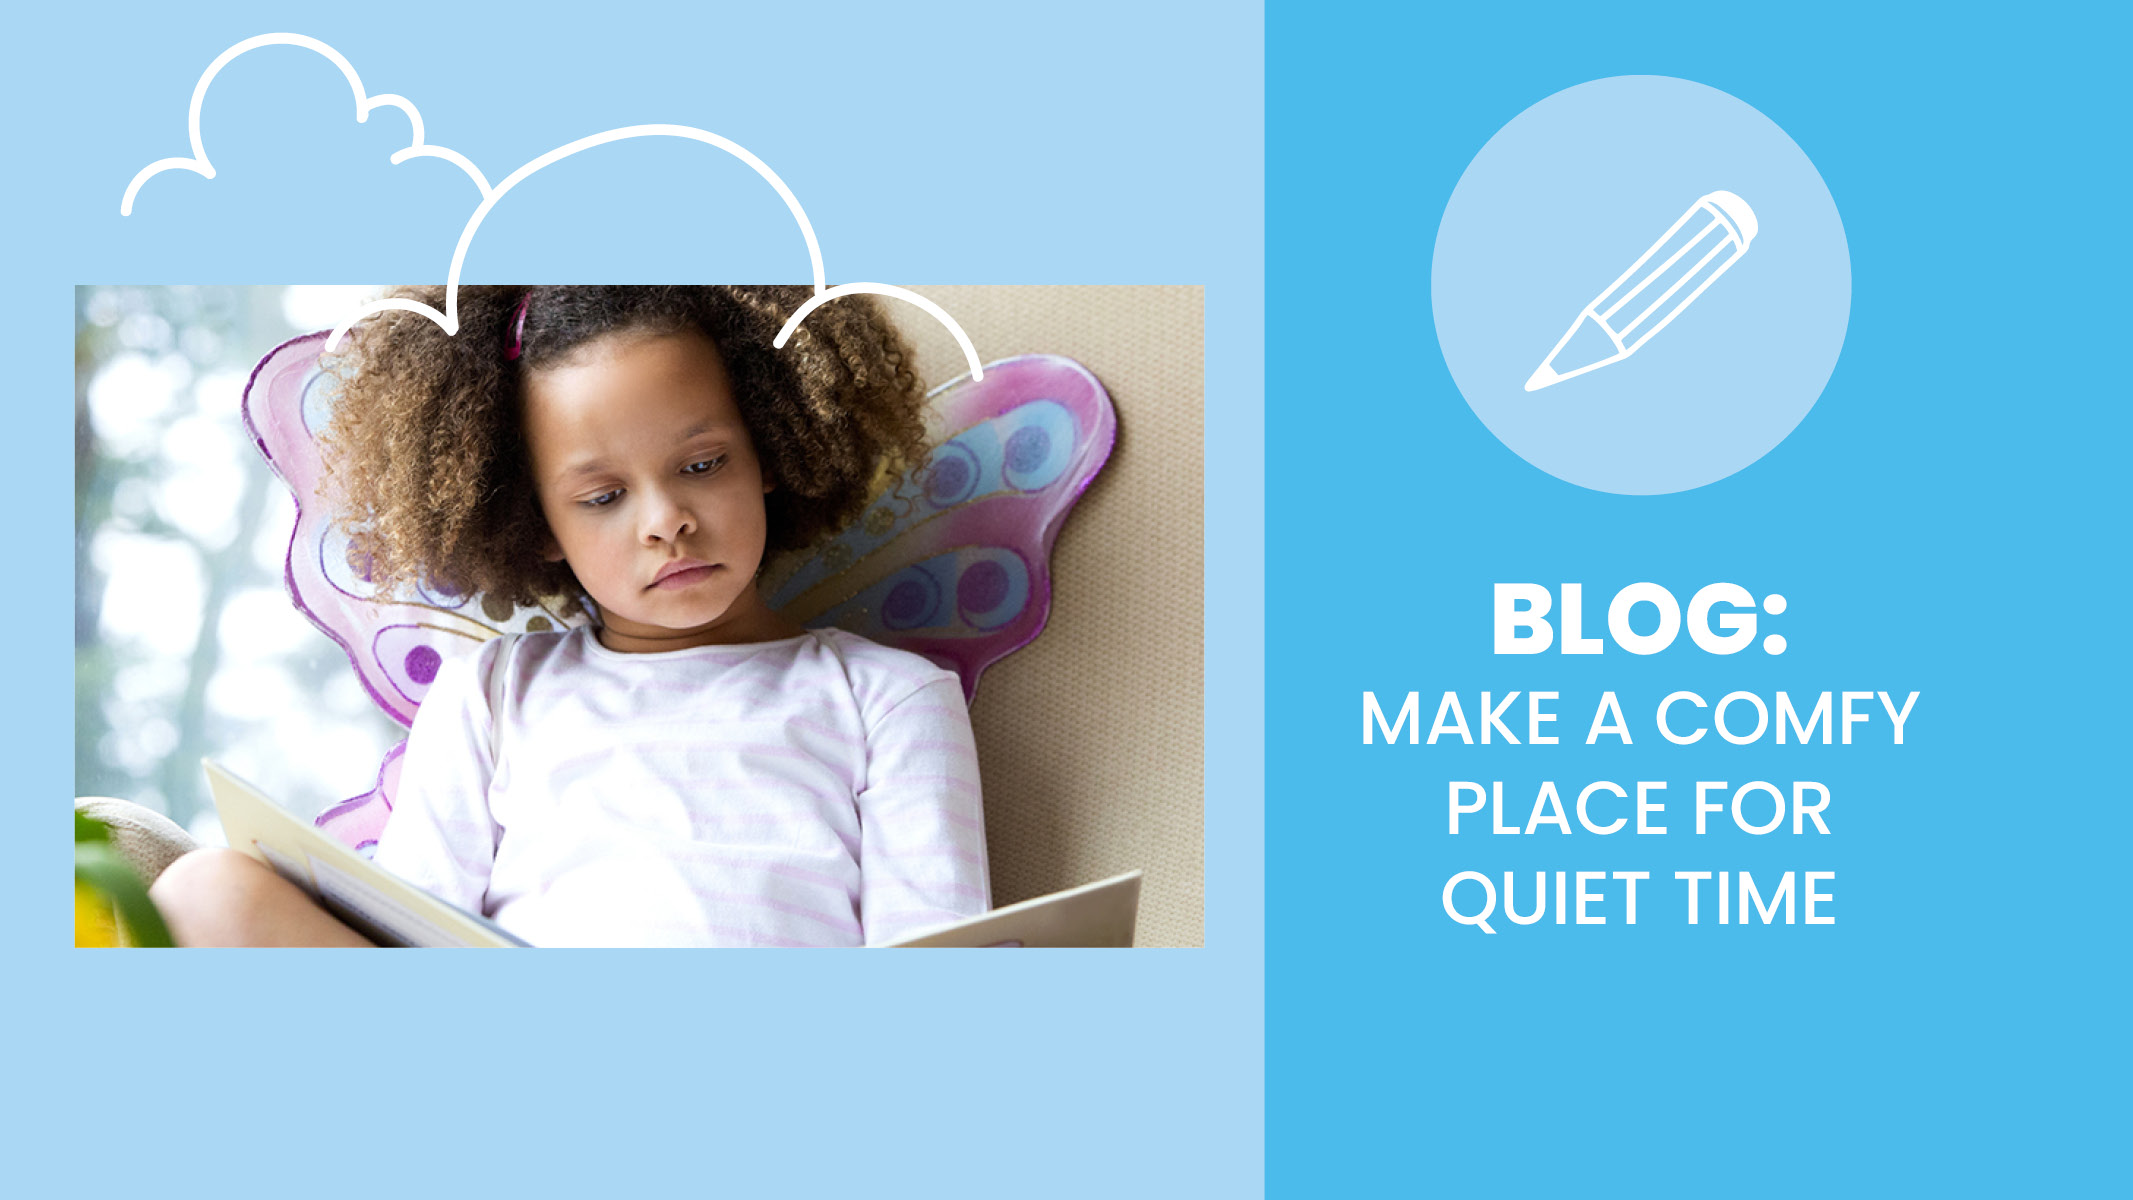 Young child, girl, sits and reads in a comfy spot during quiet time